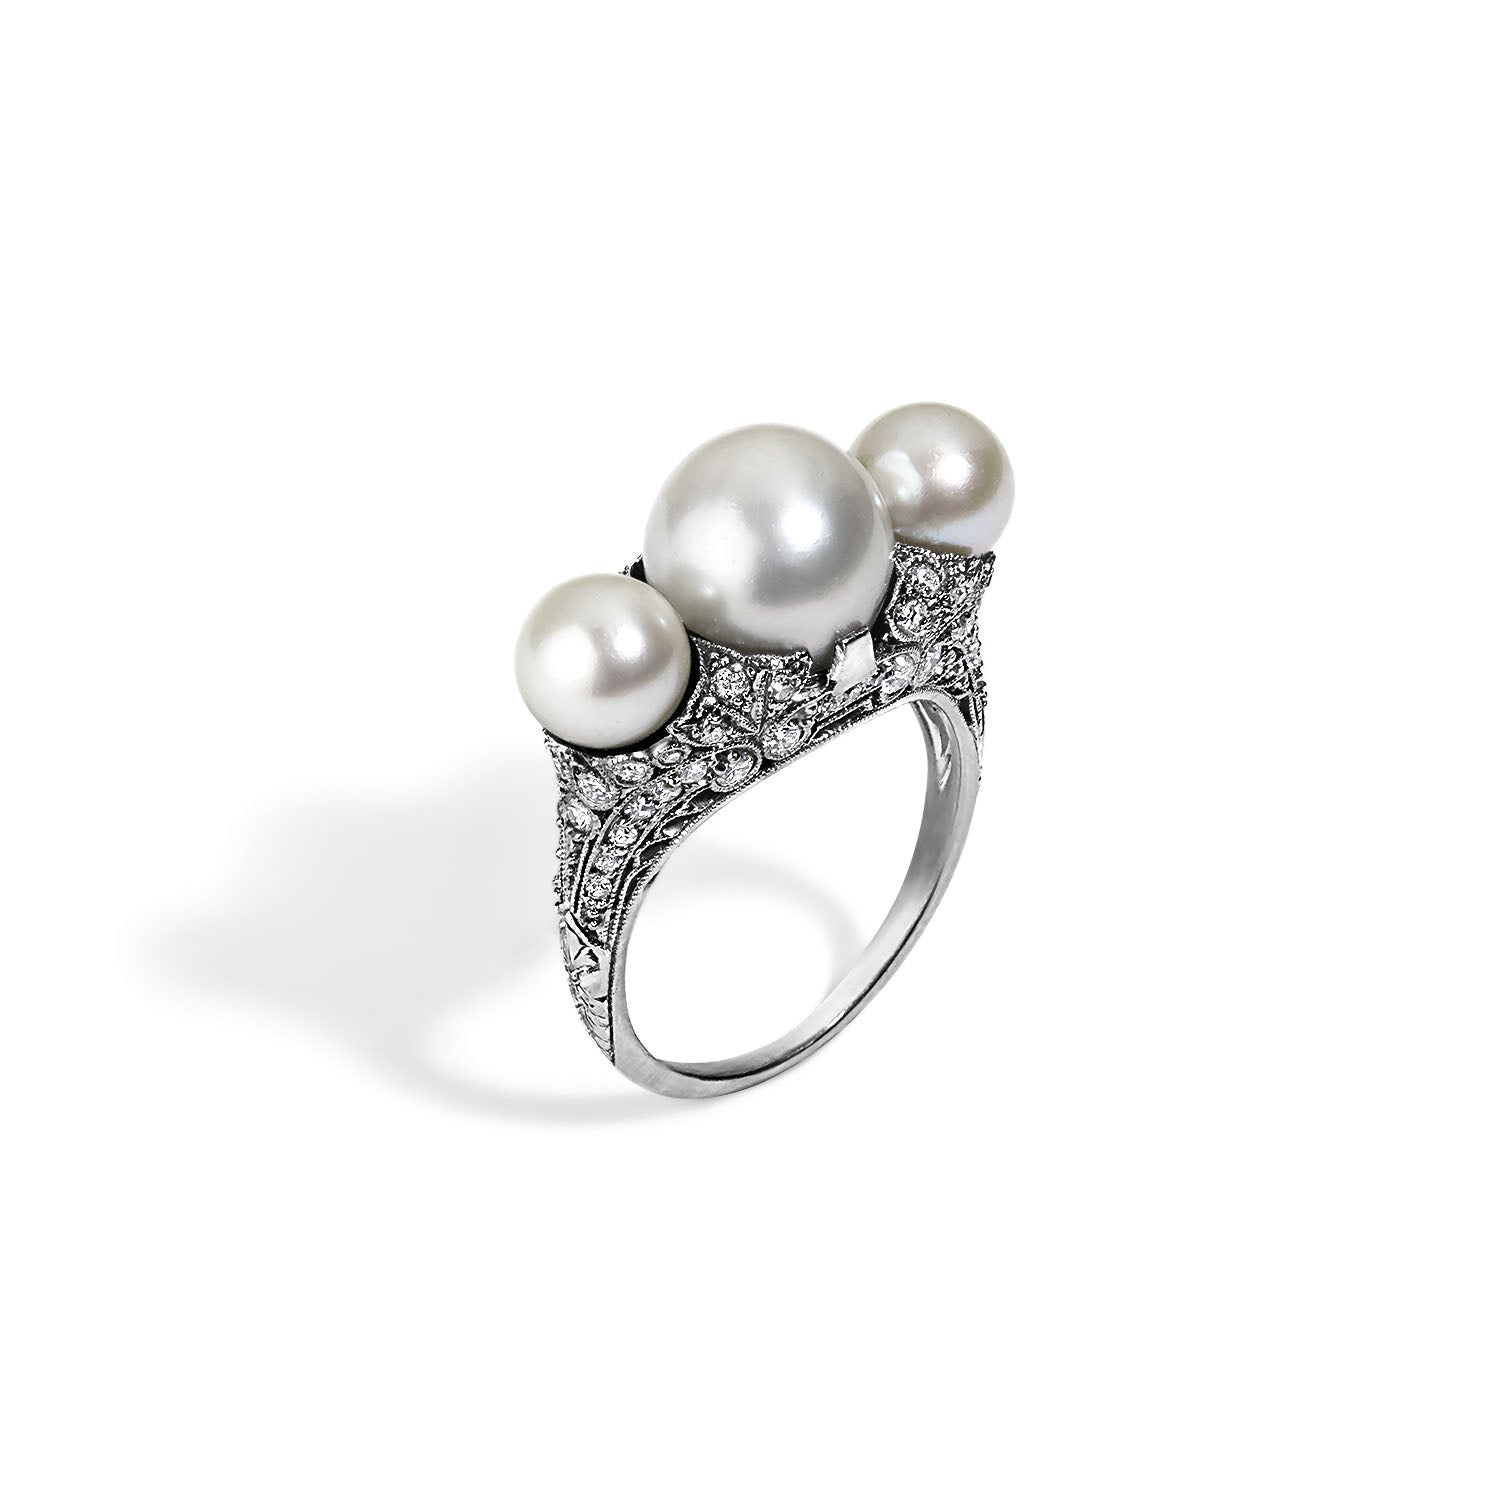 Antique Edwardian 3 Pearl Ring